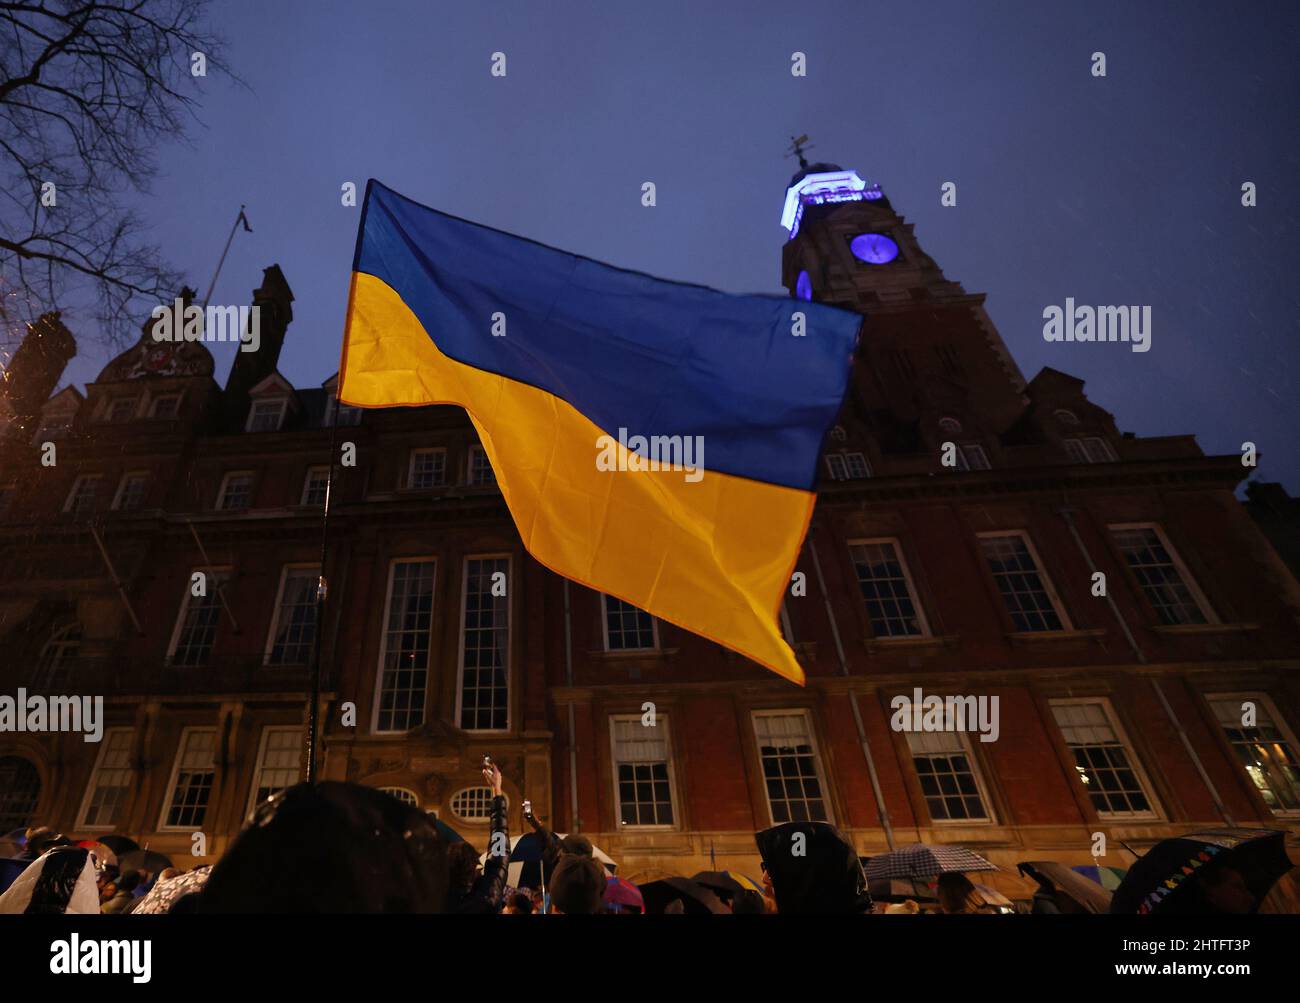 Leicester, Leicestershire, UK. 28th February 2022. Demonstrators attend a vigil after Russian President Vladimir Putin ordered the invasion of Ukraine. Hundreds of people gathered outside the Town Hall to show their support to Ukraine. Credit Darren Staples/Alamy Live News. Stock Photo